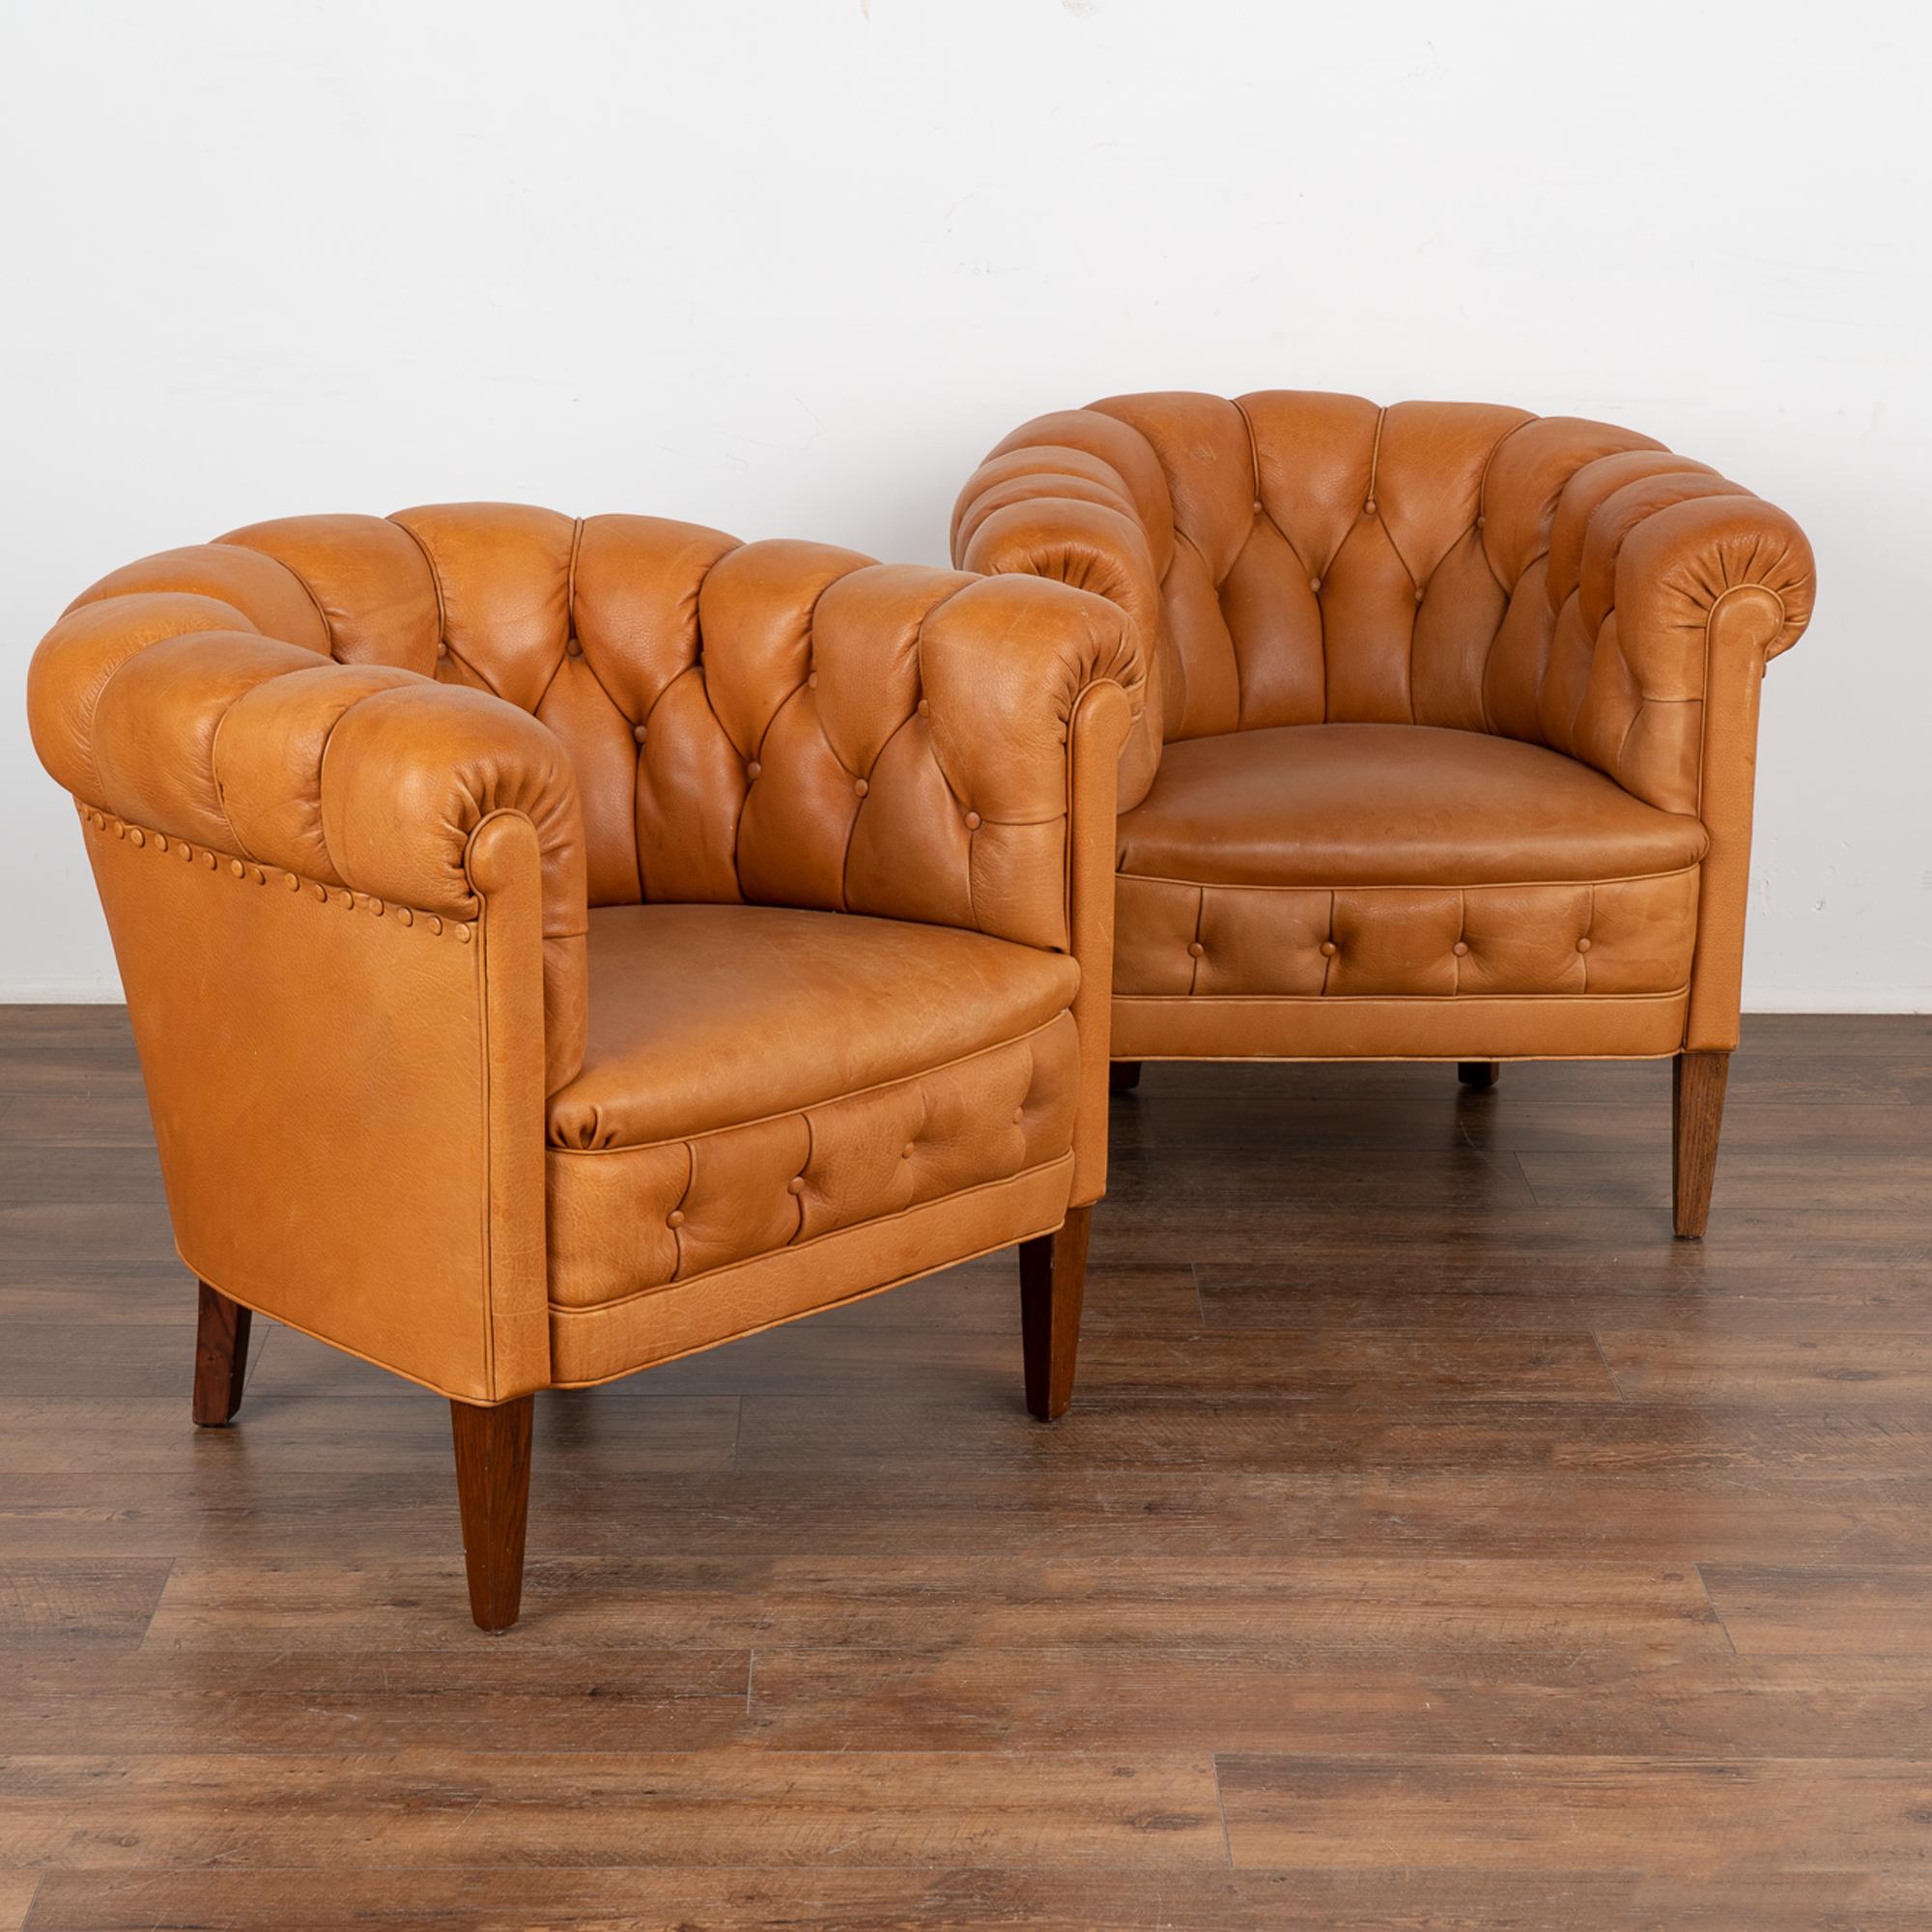 This pair of vintage leather club chairs are welcoming with barrel shaped arms and tufted backs with self covered buttons and piping.
Each chair sits comfortably and snug, with seat height at 17.5